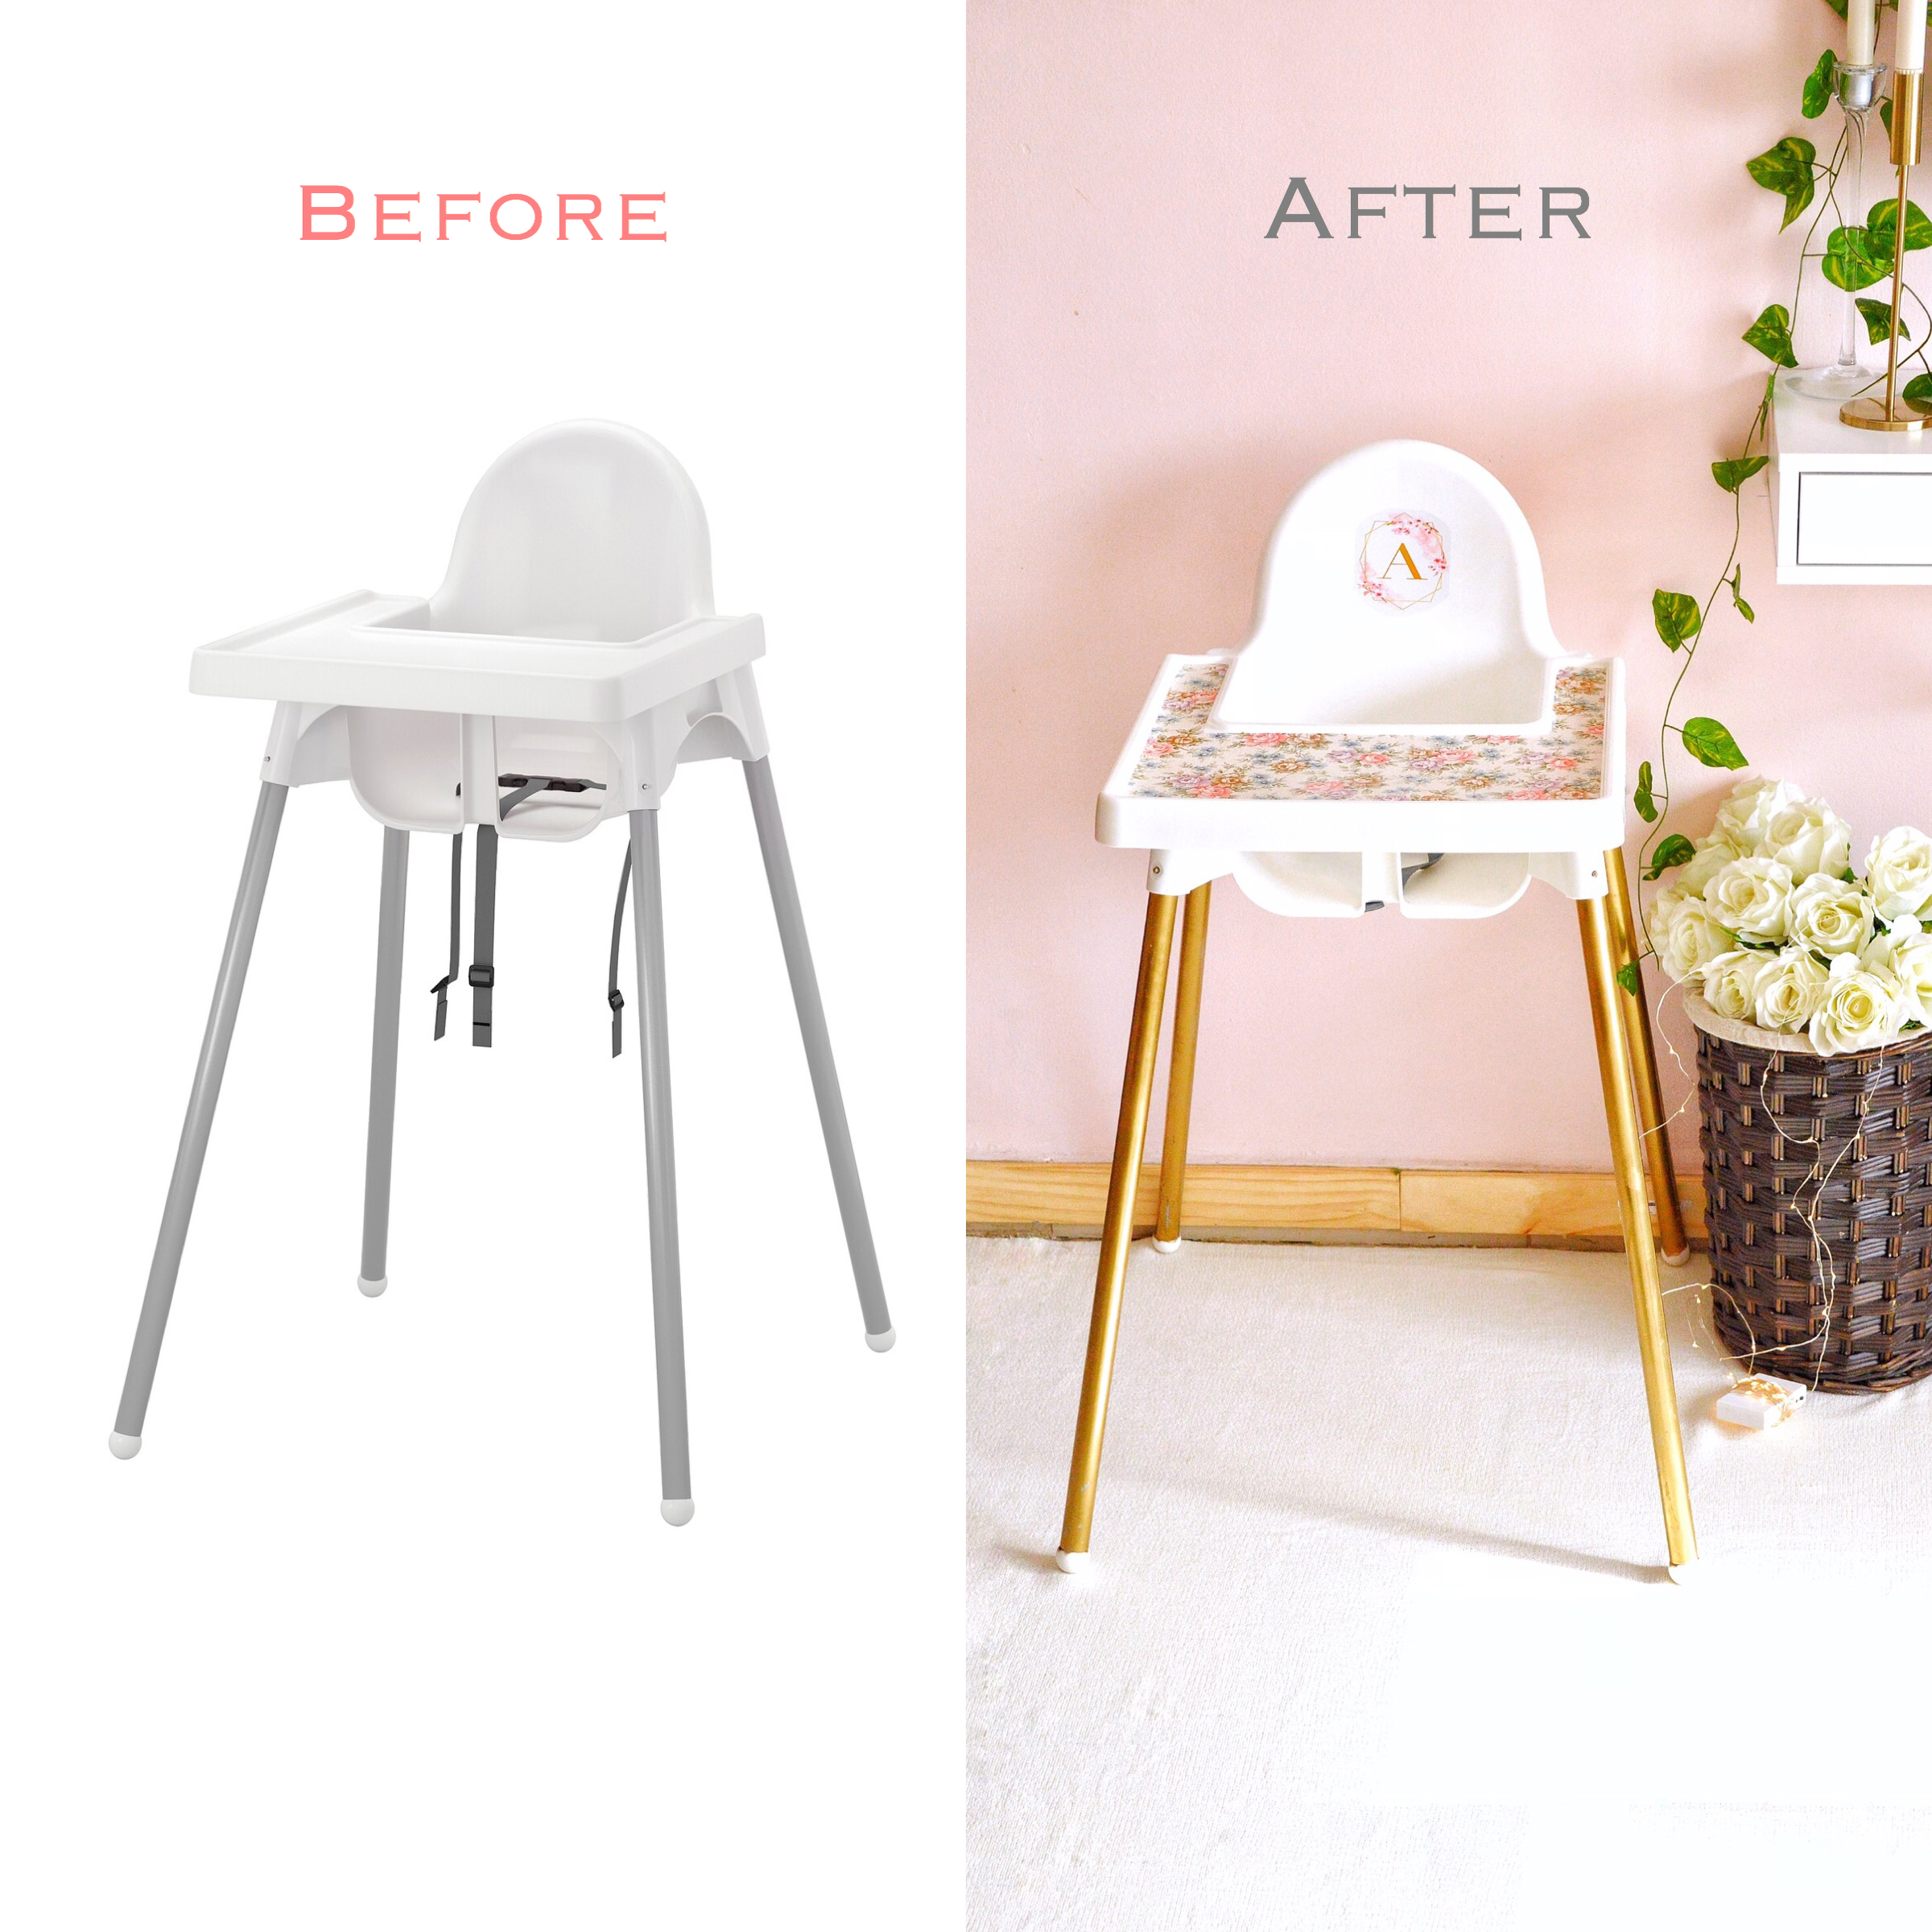 3 in 1 highchair table and chair